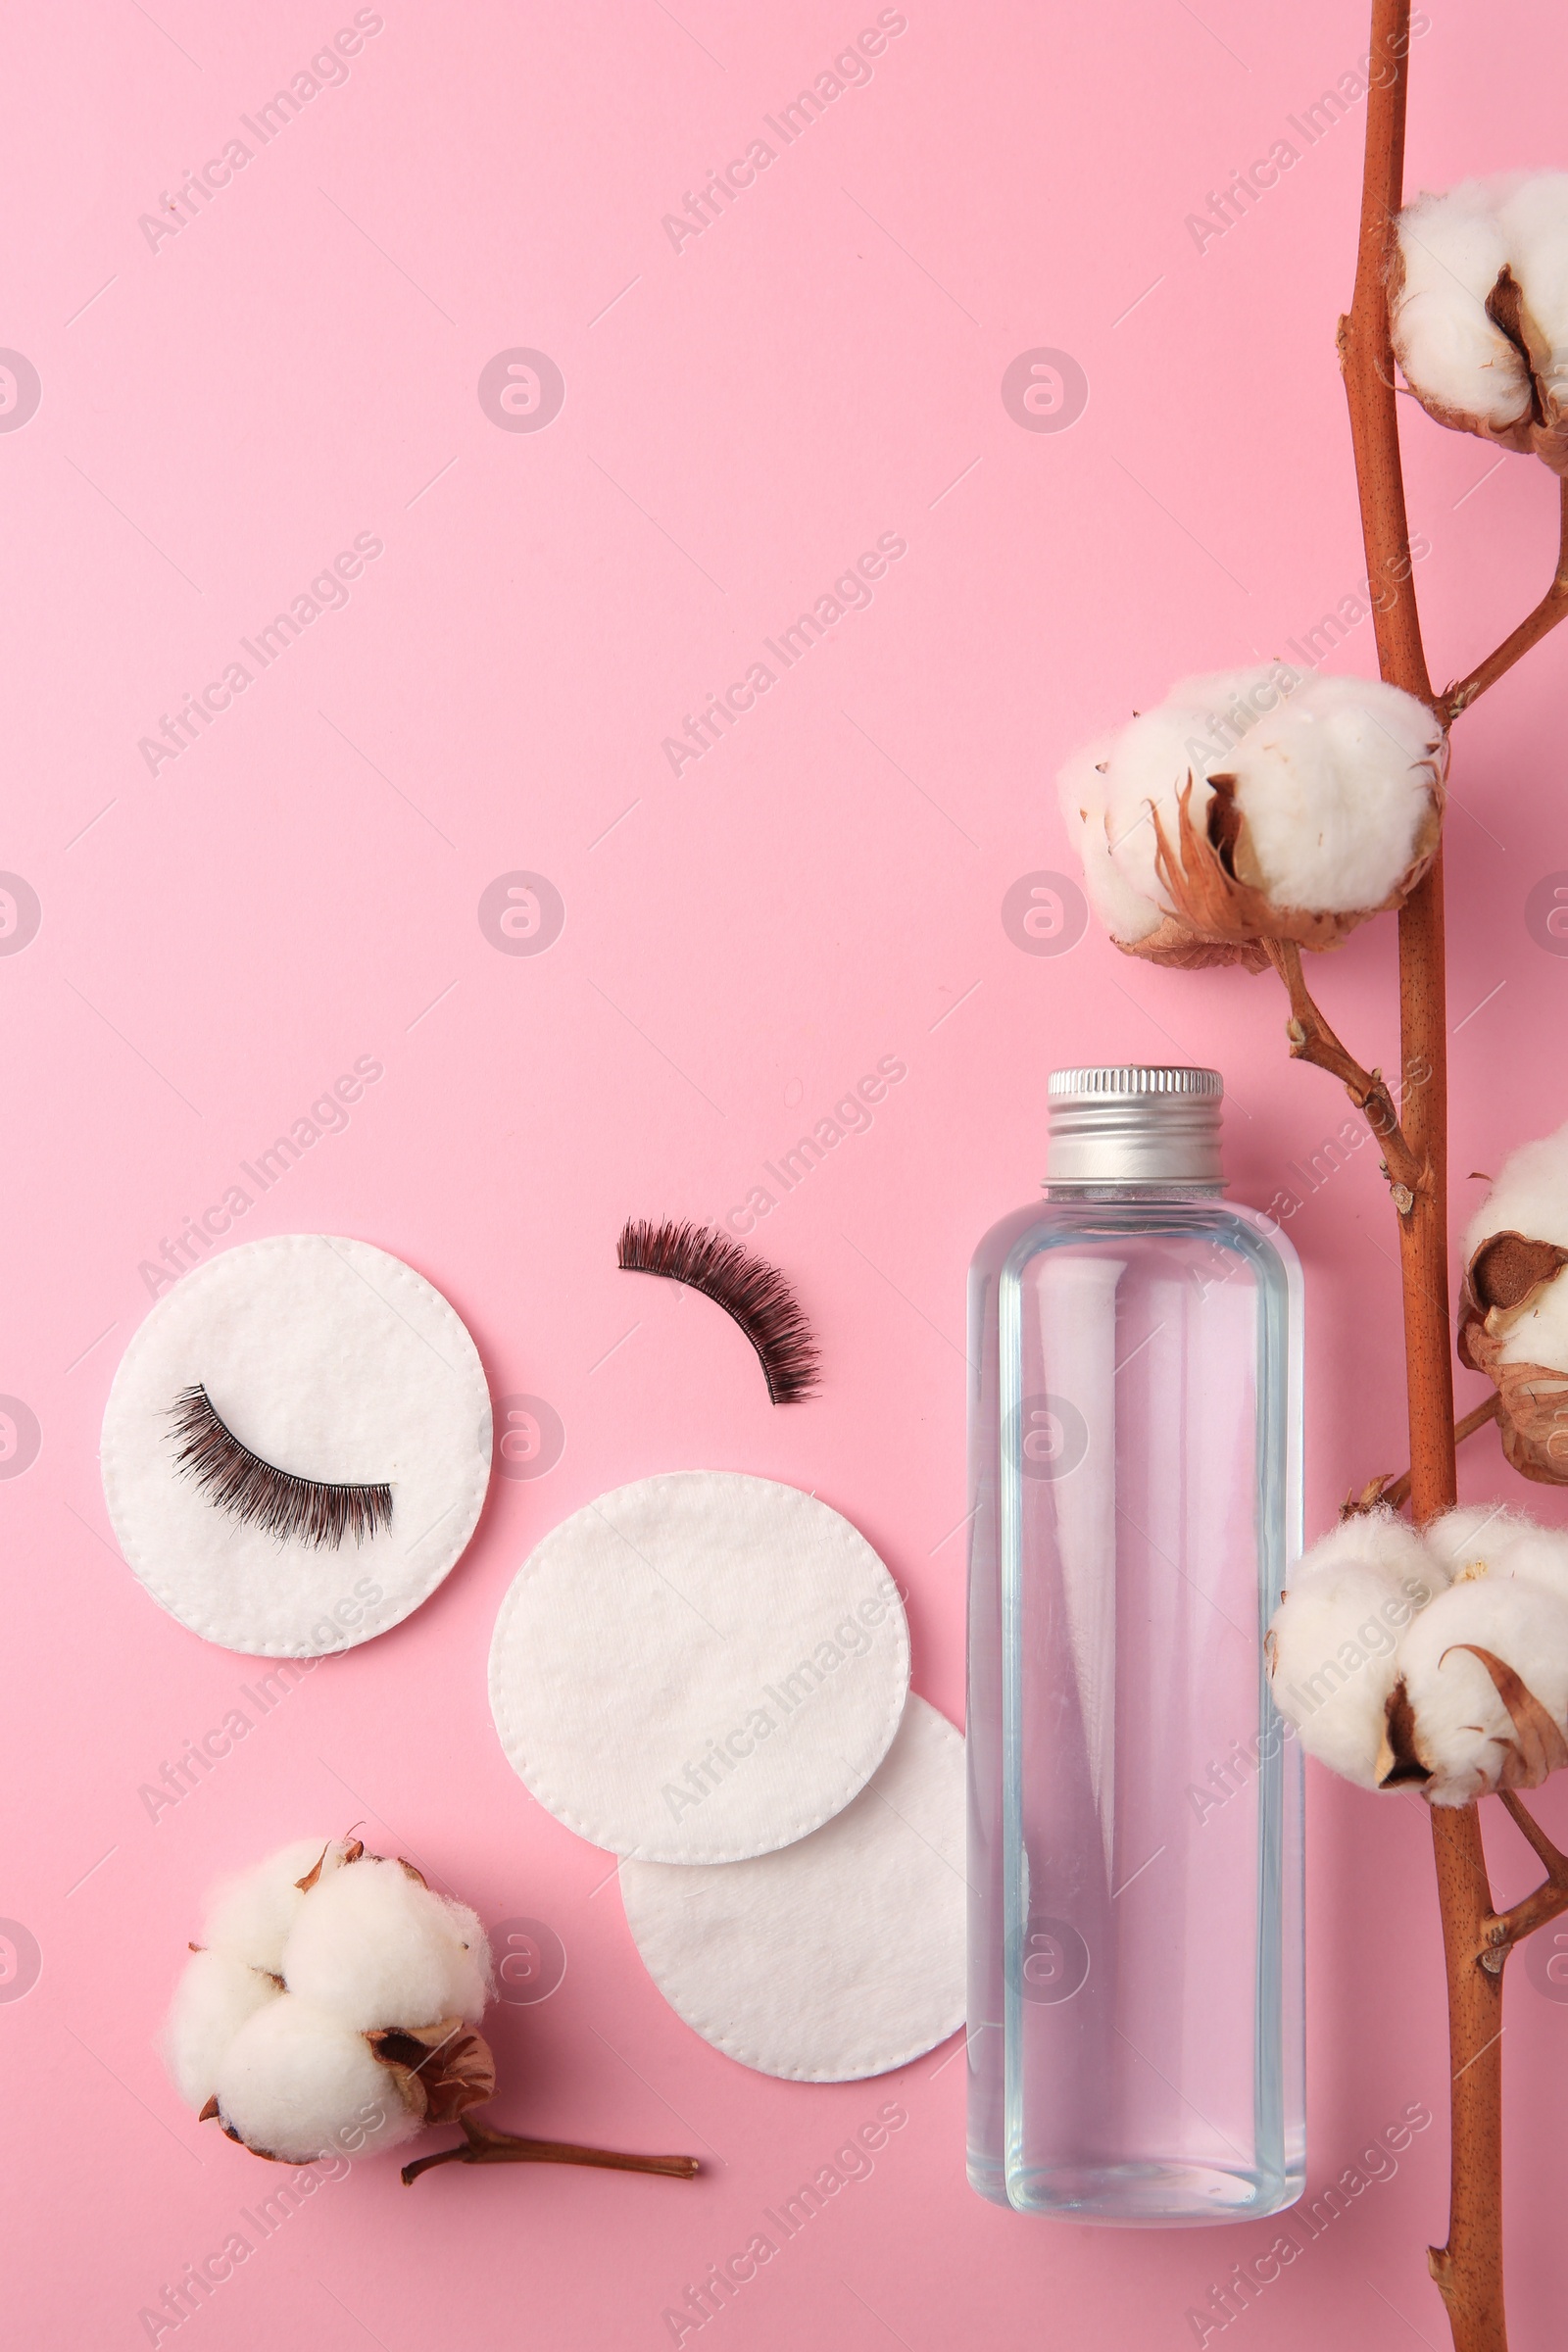 Photo of Bottle of makeup remover, cotton flowers, pads and false eyelashes on pink background, flat lay. Space for text